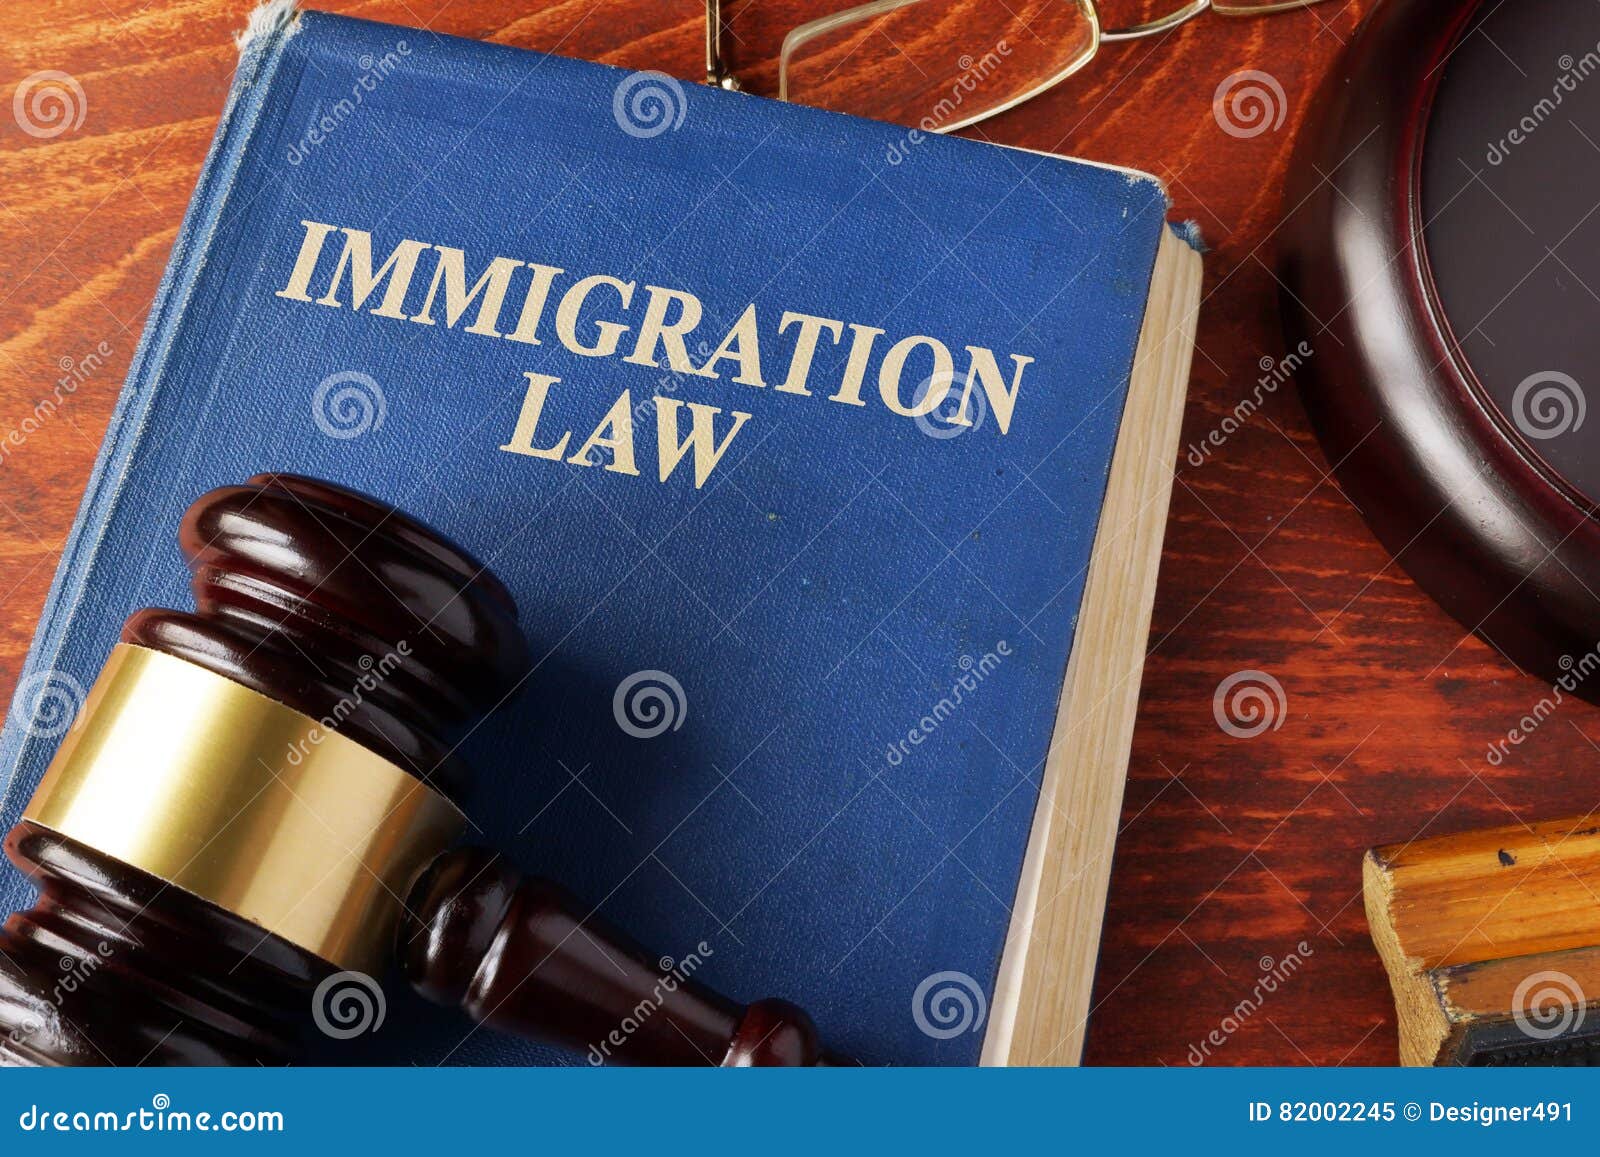 book with title immigration law